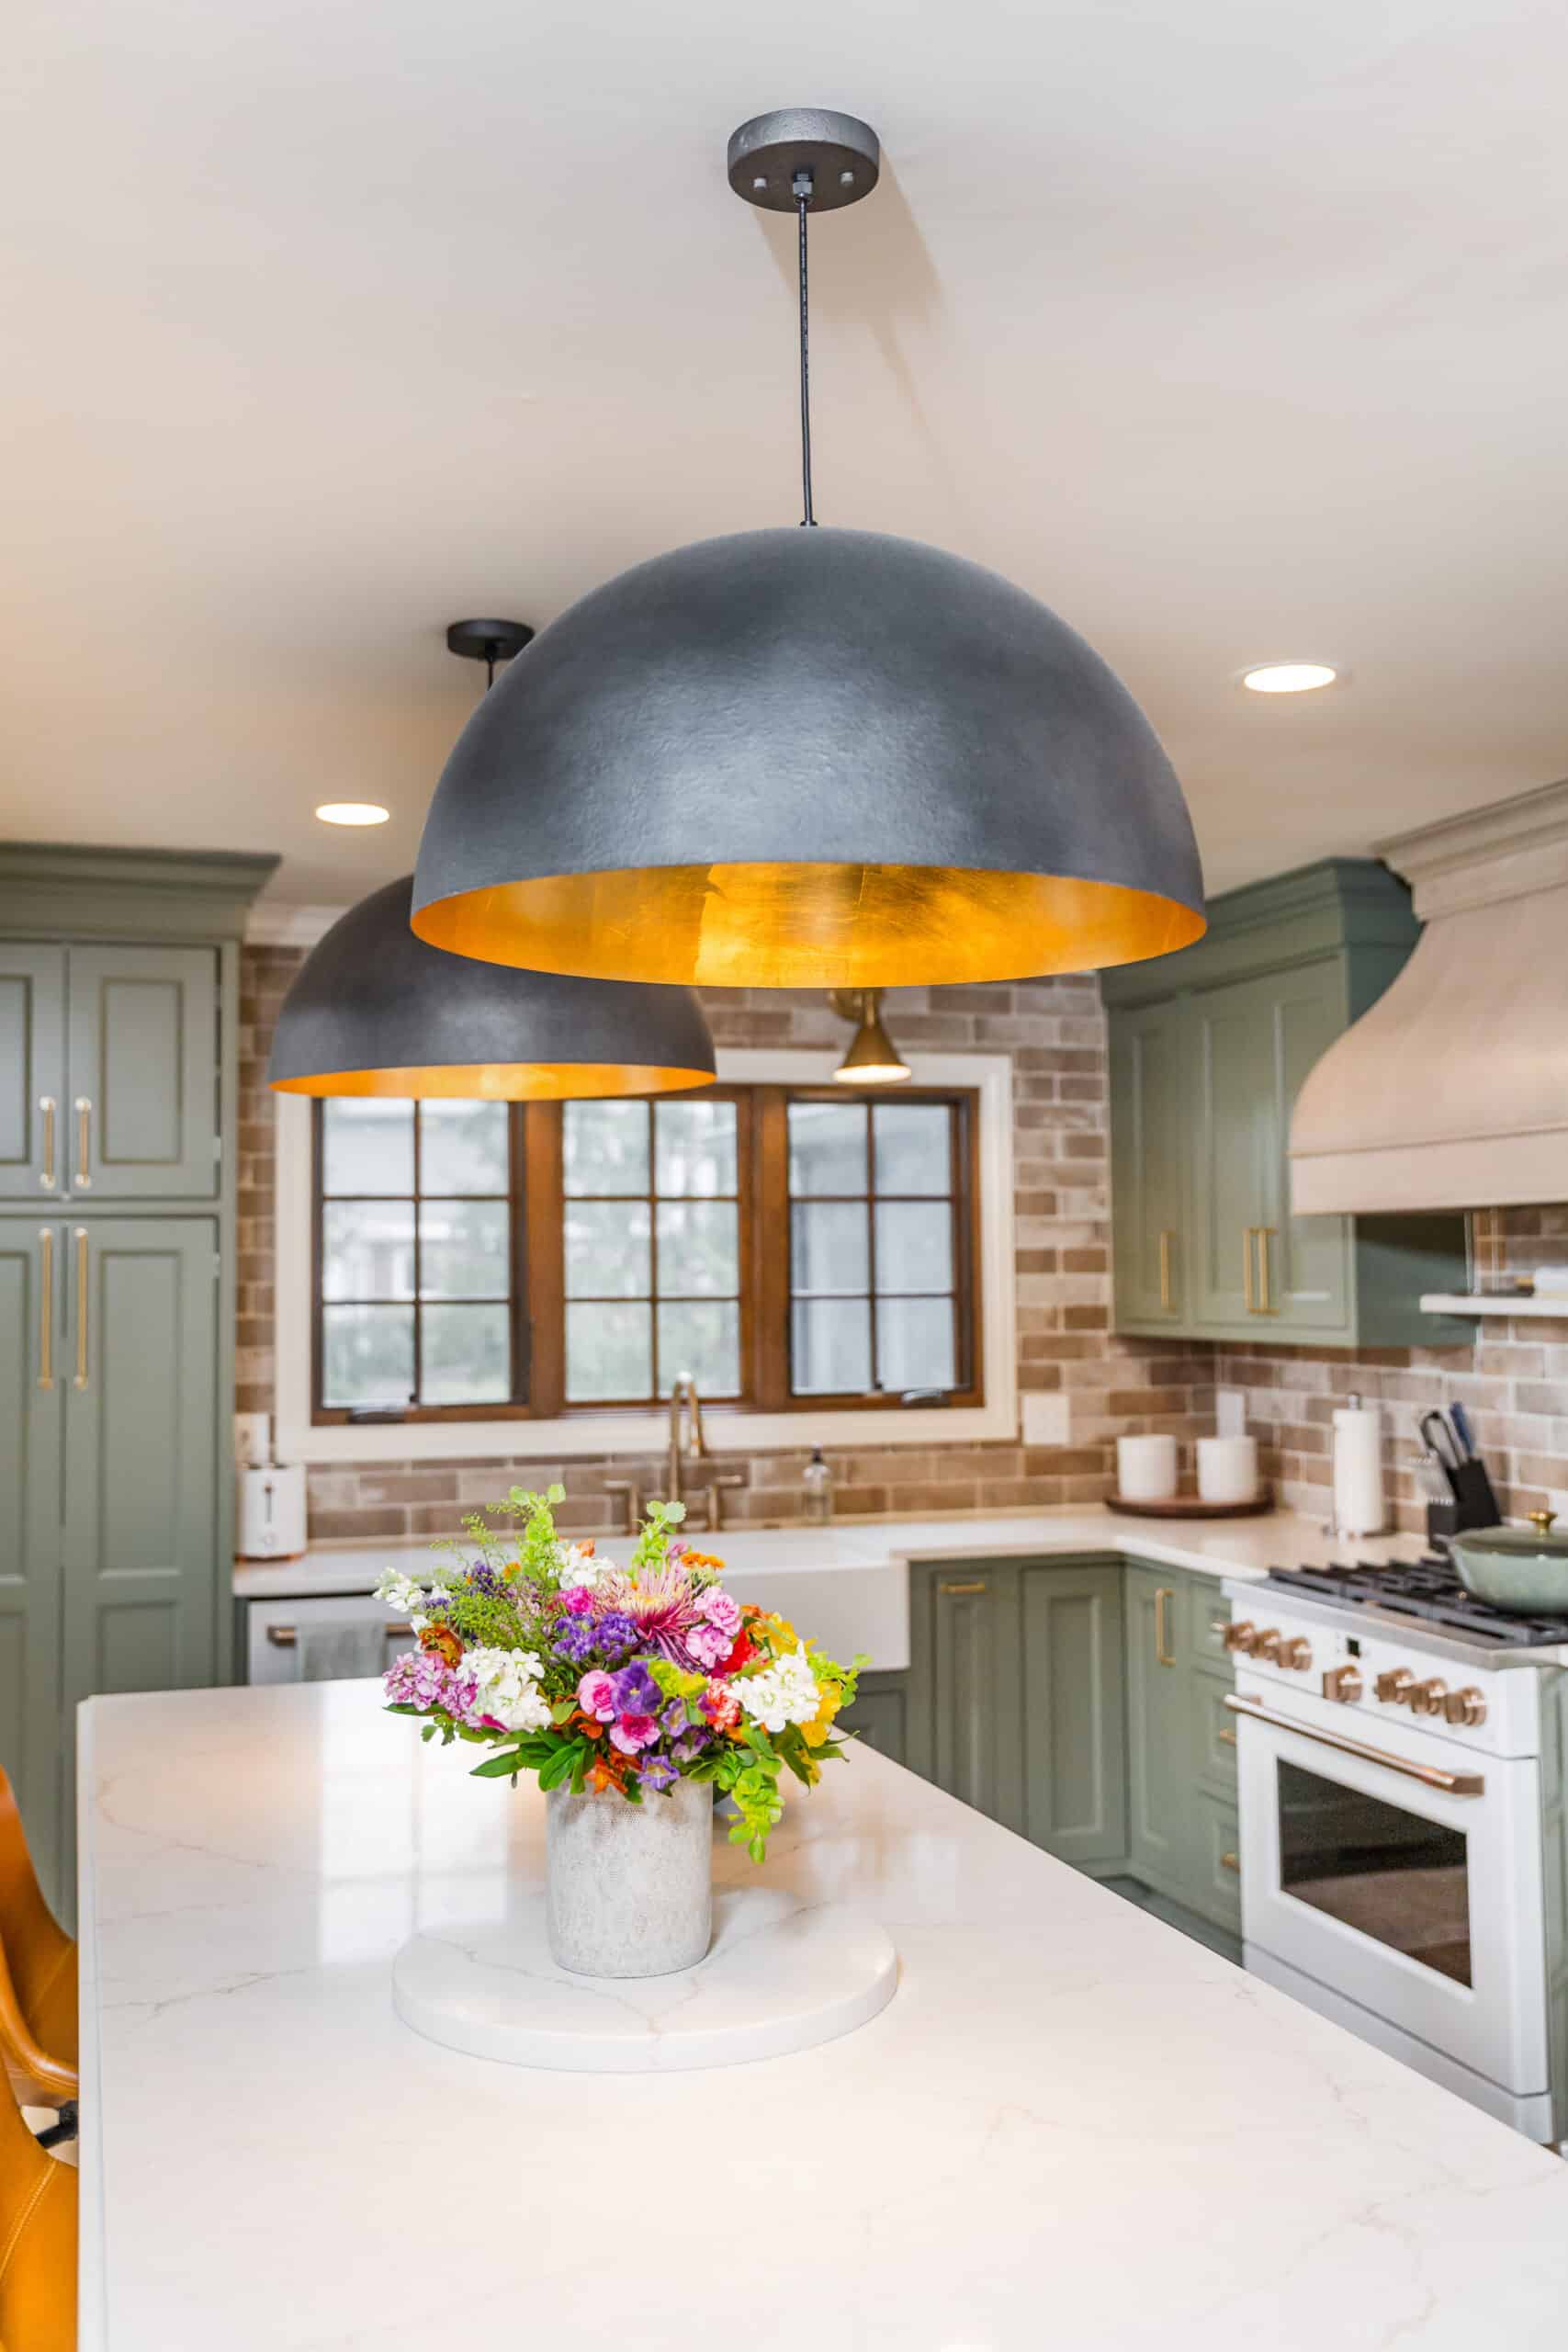 Nicholas Design Build | Modern kitchen with a large pendant light over an island with a floral centerpiece.